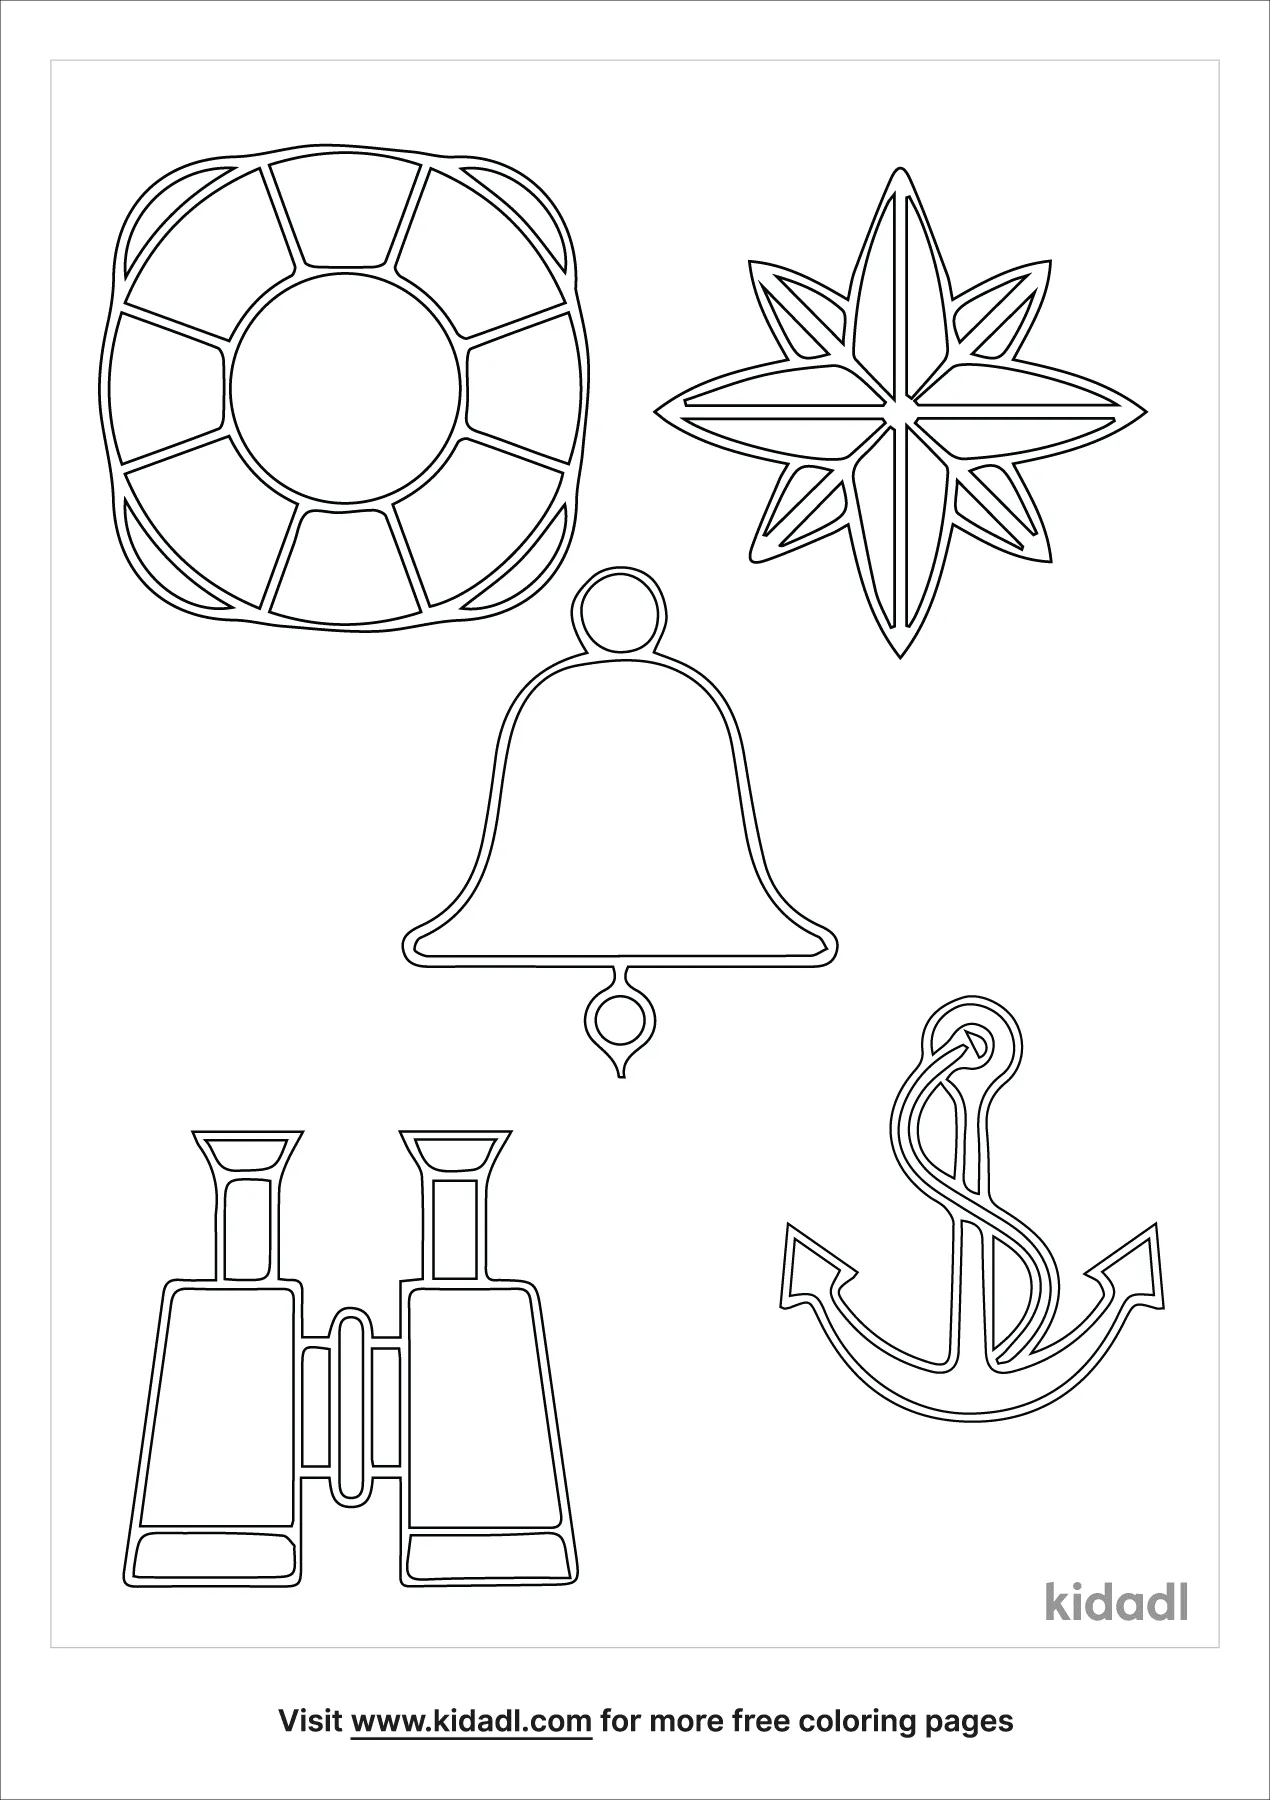 Marine Coloring Page